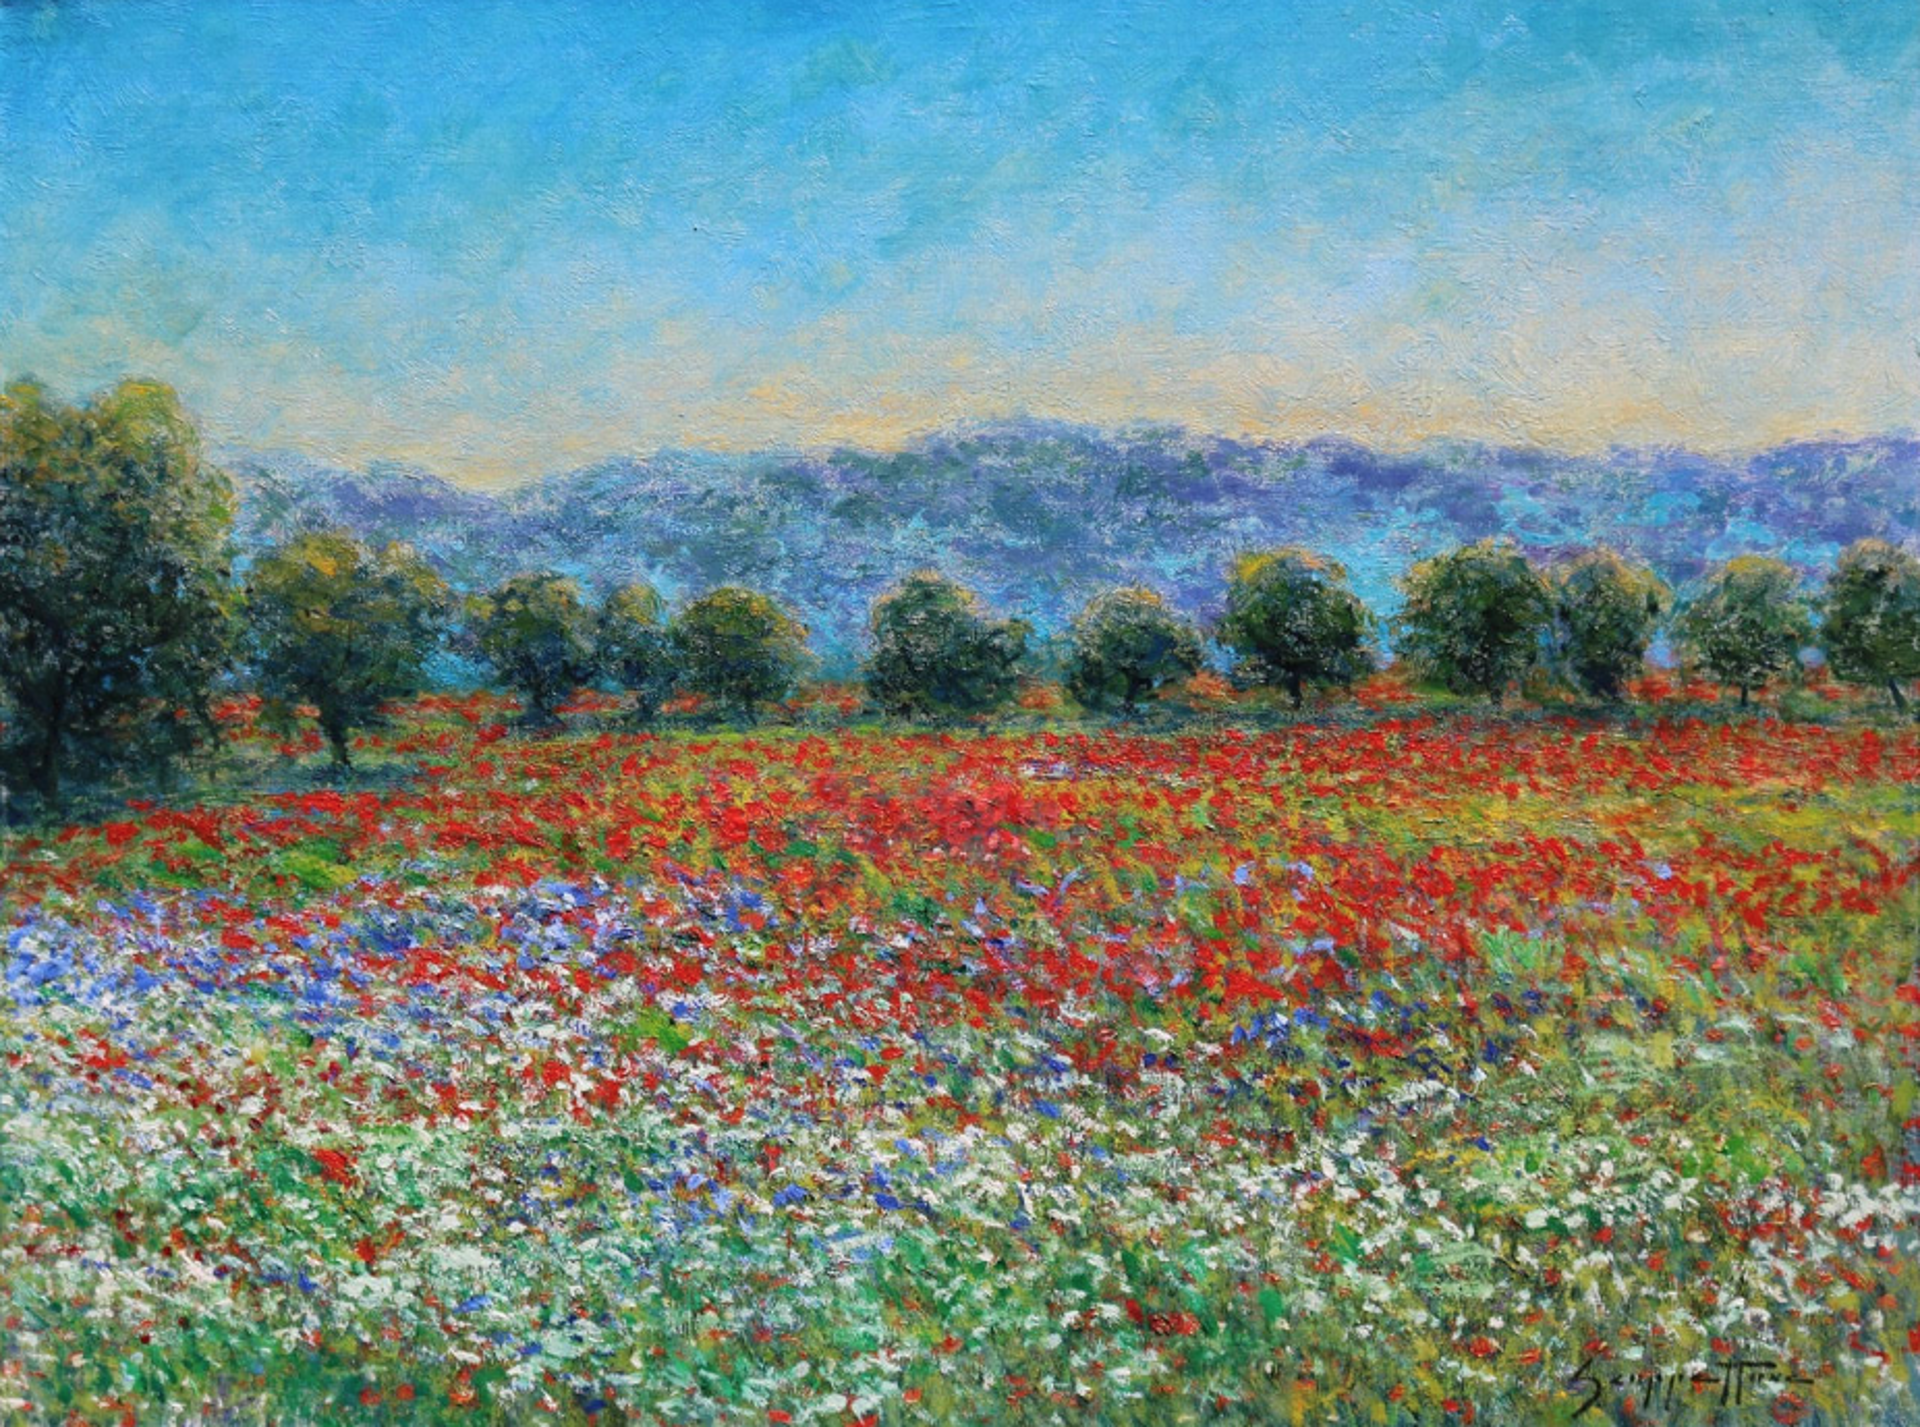 Red Poppy and Wildflower Field in Sun by James Scoppettone